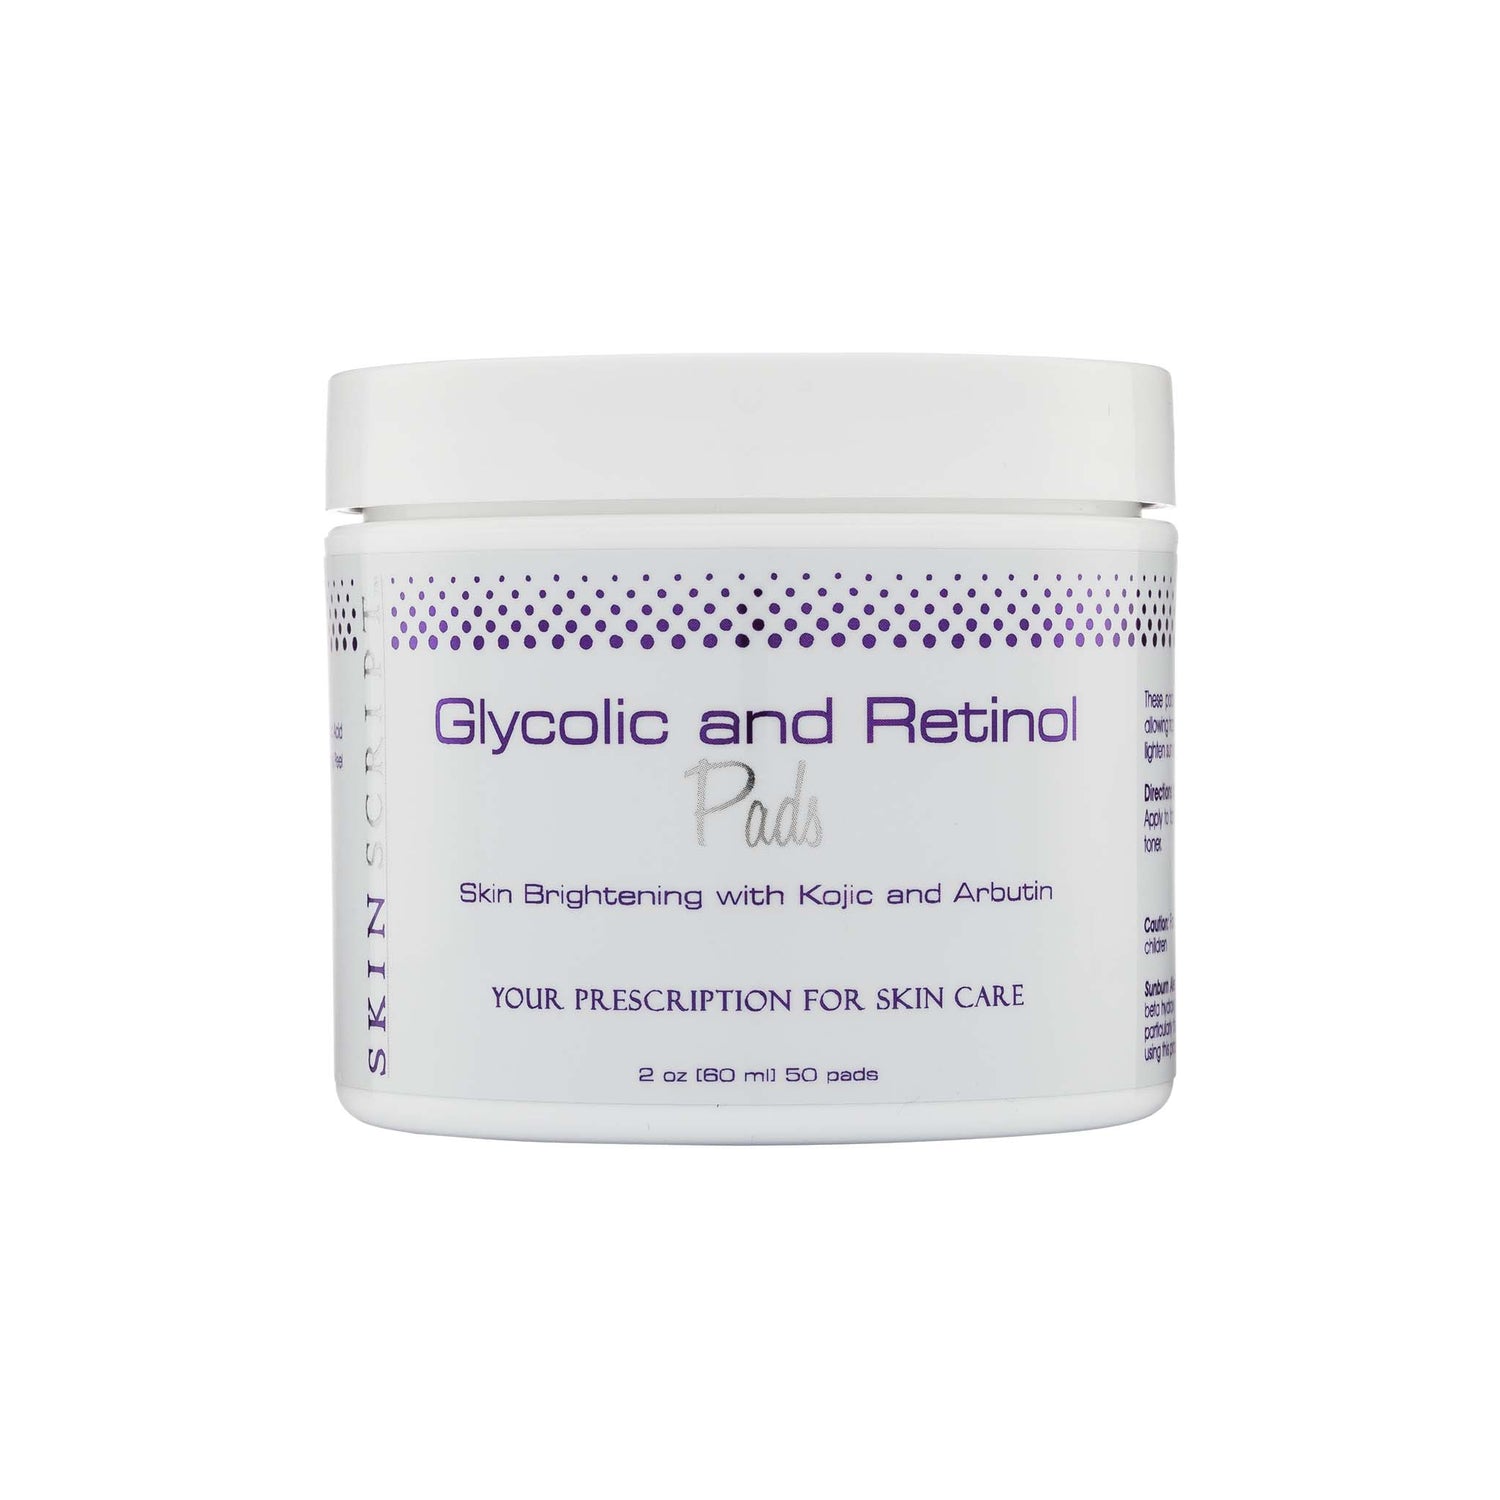 Skin Script Glycolic Retinol Pads are designed to gently and progressively renew the skin. Even out skin tone and reduce fine lines and wrinkles.